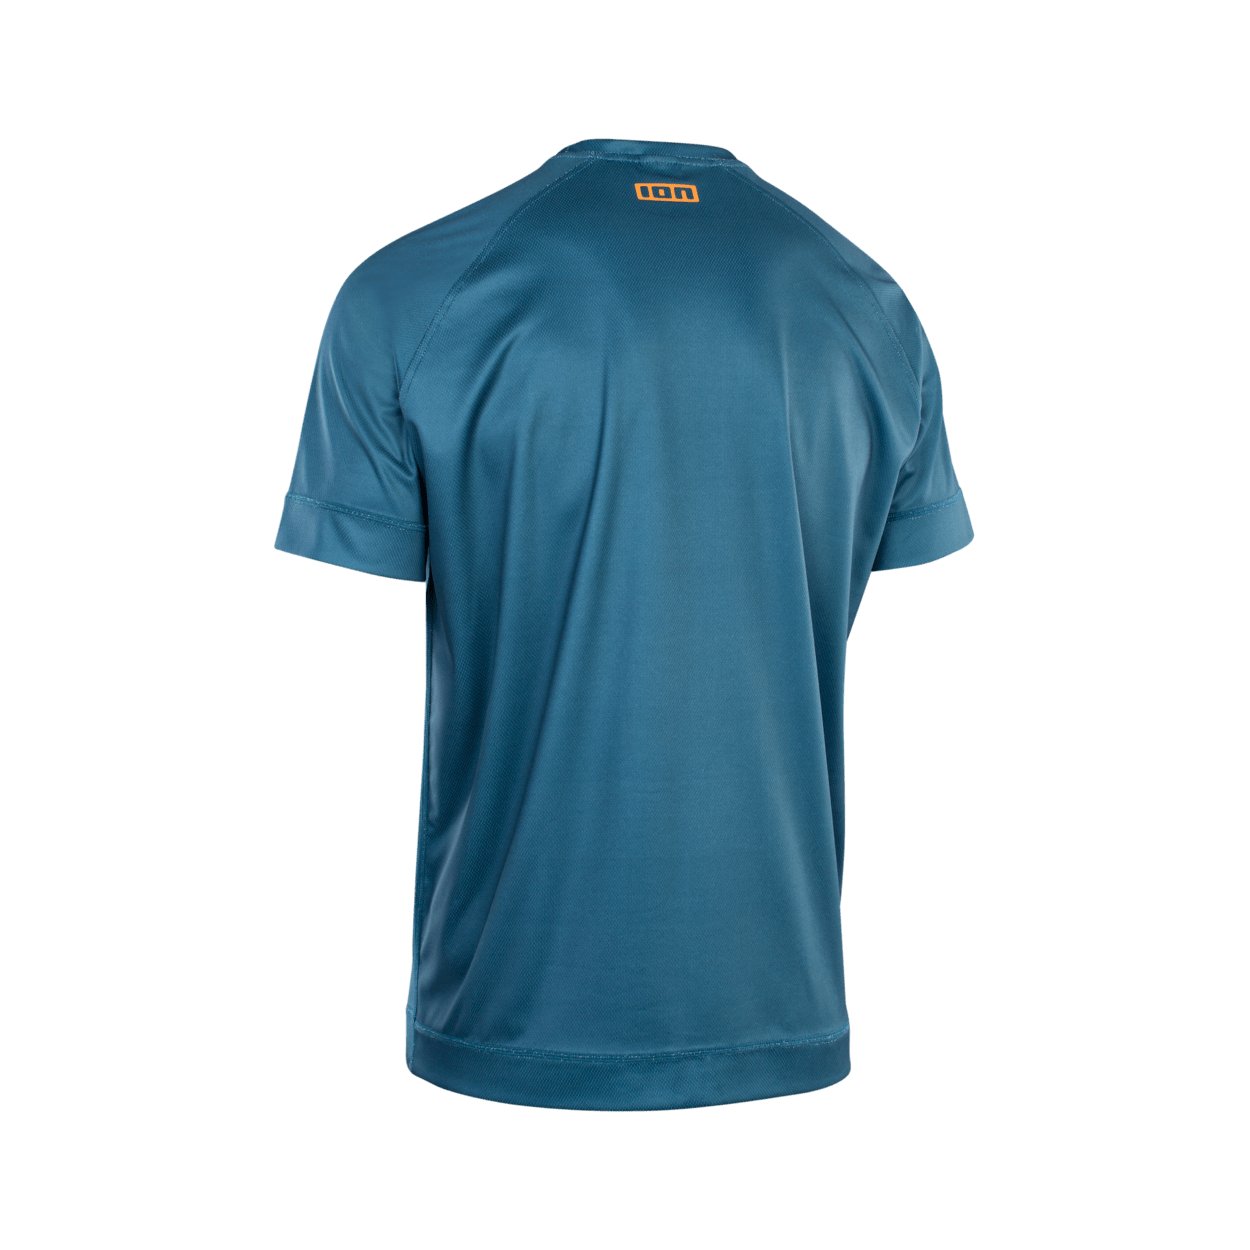 ION Wetshirt SS men 2022 - Worthing Watersports - 9010583051031 - Tops - ION Water